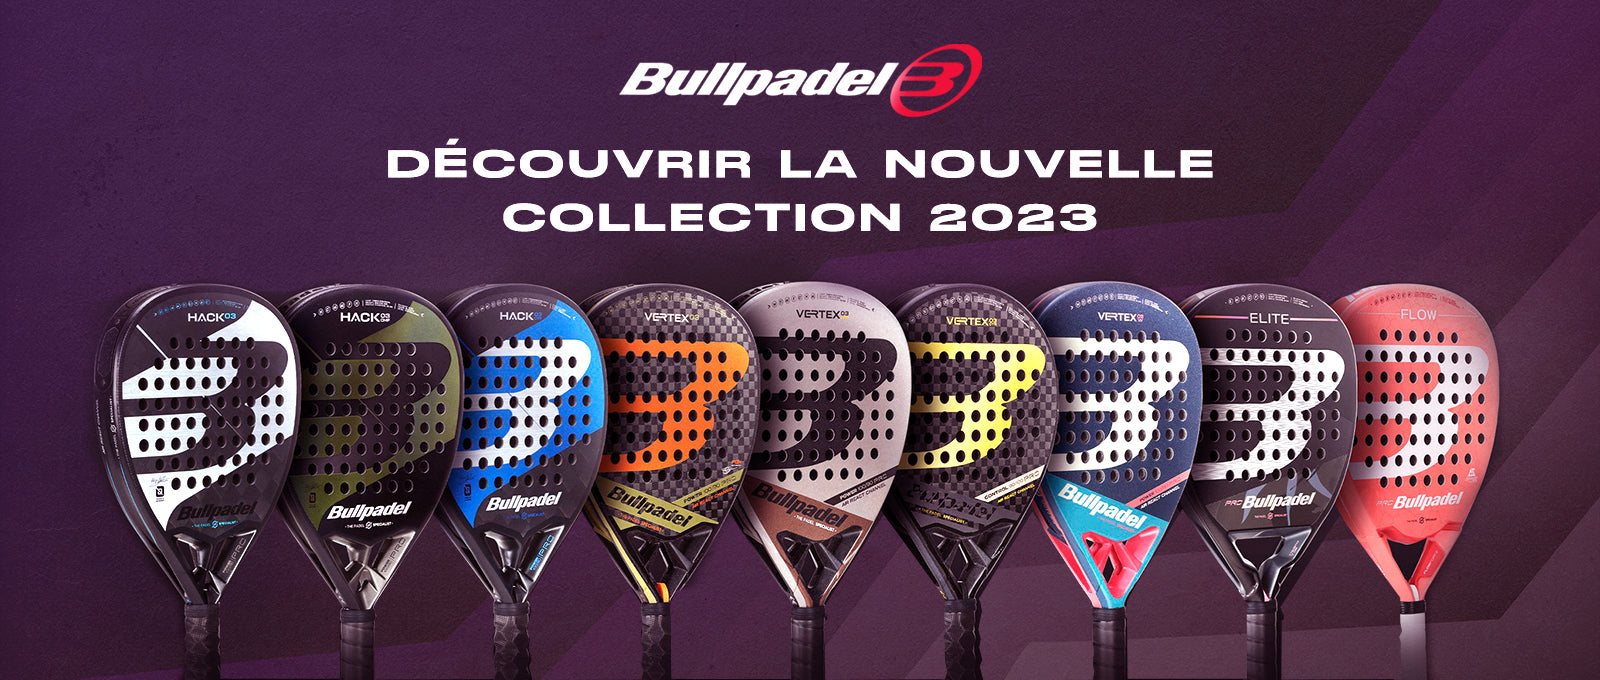 Buy Babolat Contact Padel Racket Online at PDH Padel (Fast Delivery)